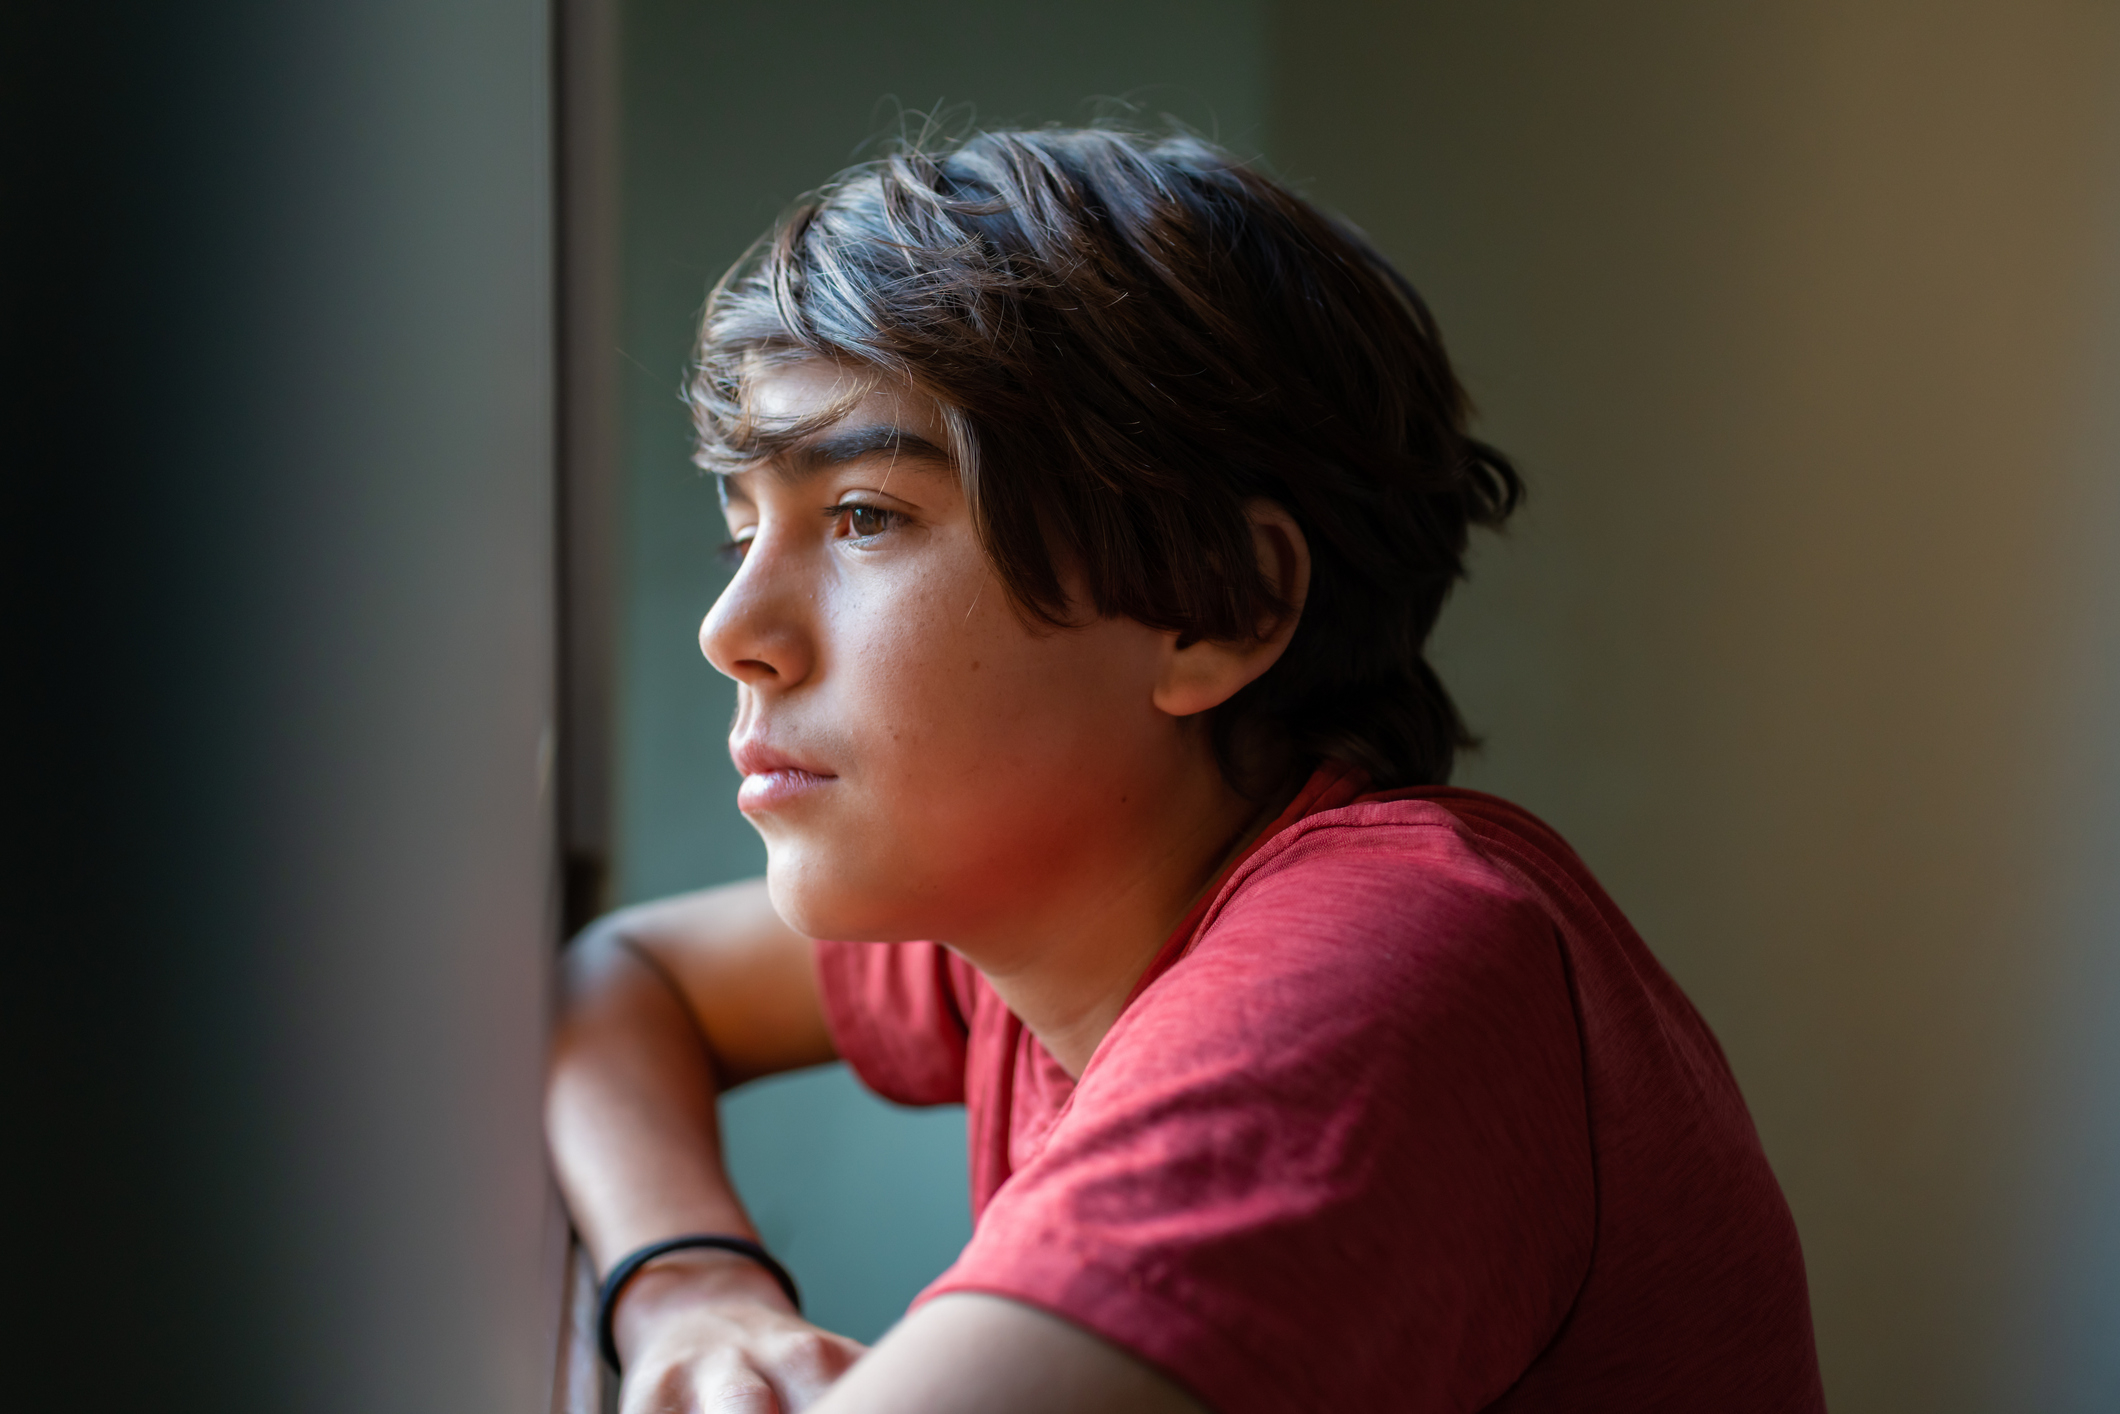 A young boy staring out a window